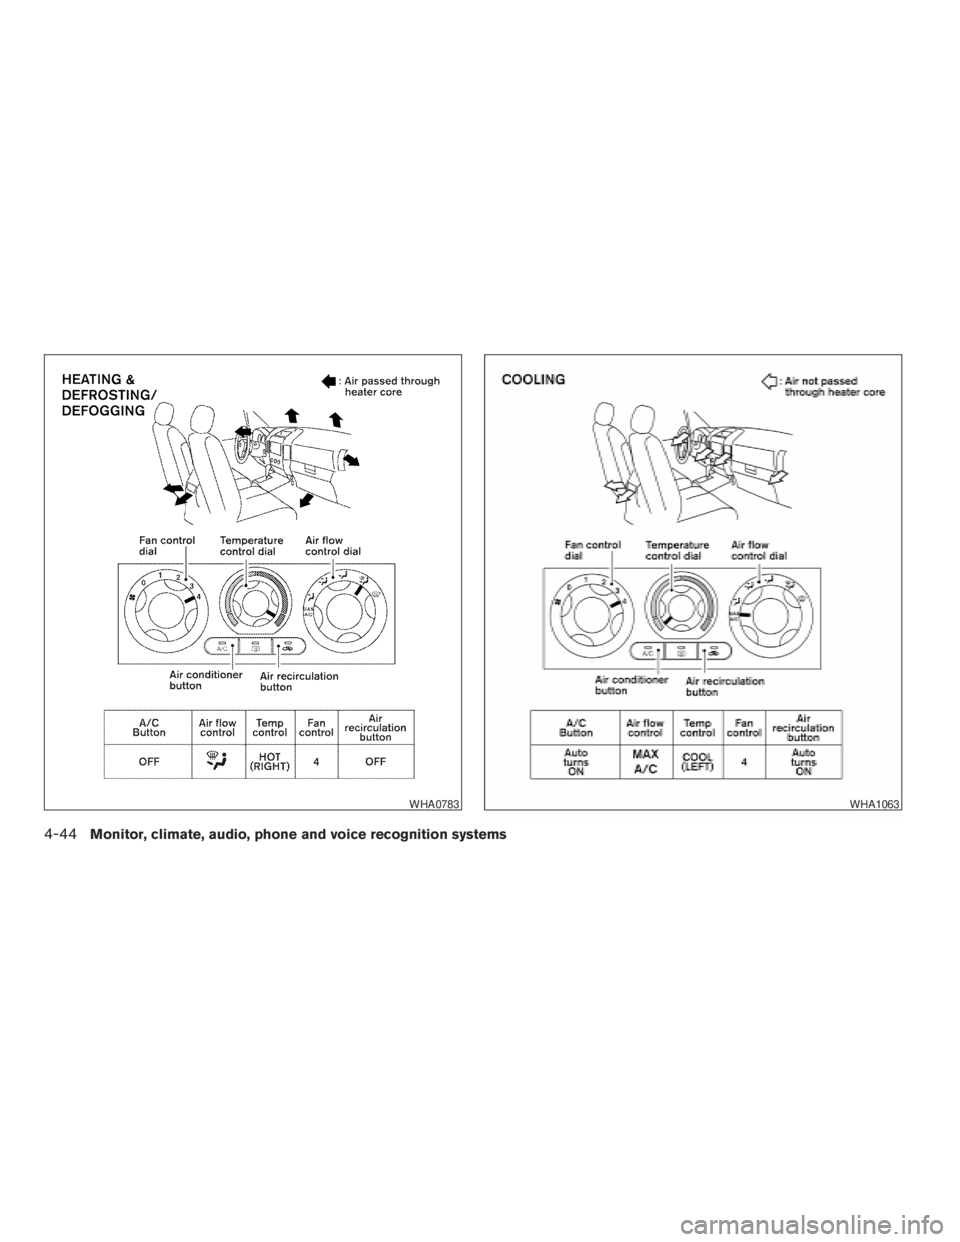 NISSAN PATHFINDER 2009  Owner´s Manual WHA0783WHA1063
4-44Monitor, climate, audio, phone and voice recognition systems
ZREVIEW COPYÐ2009 Pathfinder(pat)
Owners ManualÐUSA_English(nna)
05/29/08Ðdebbie
X 